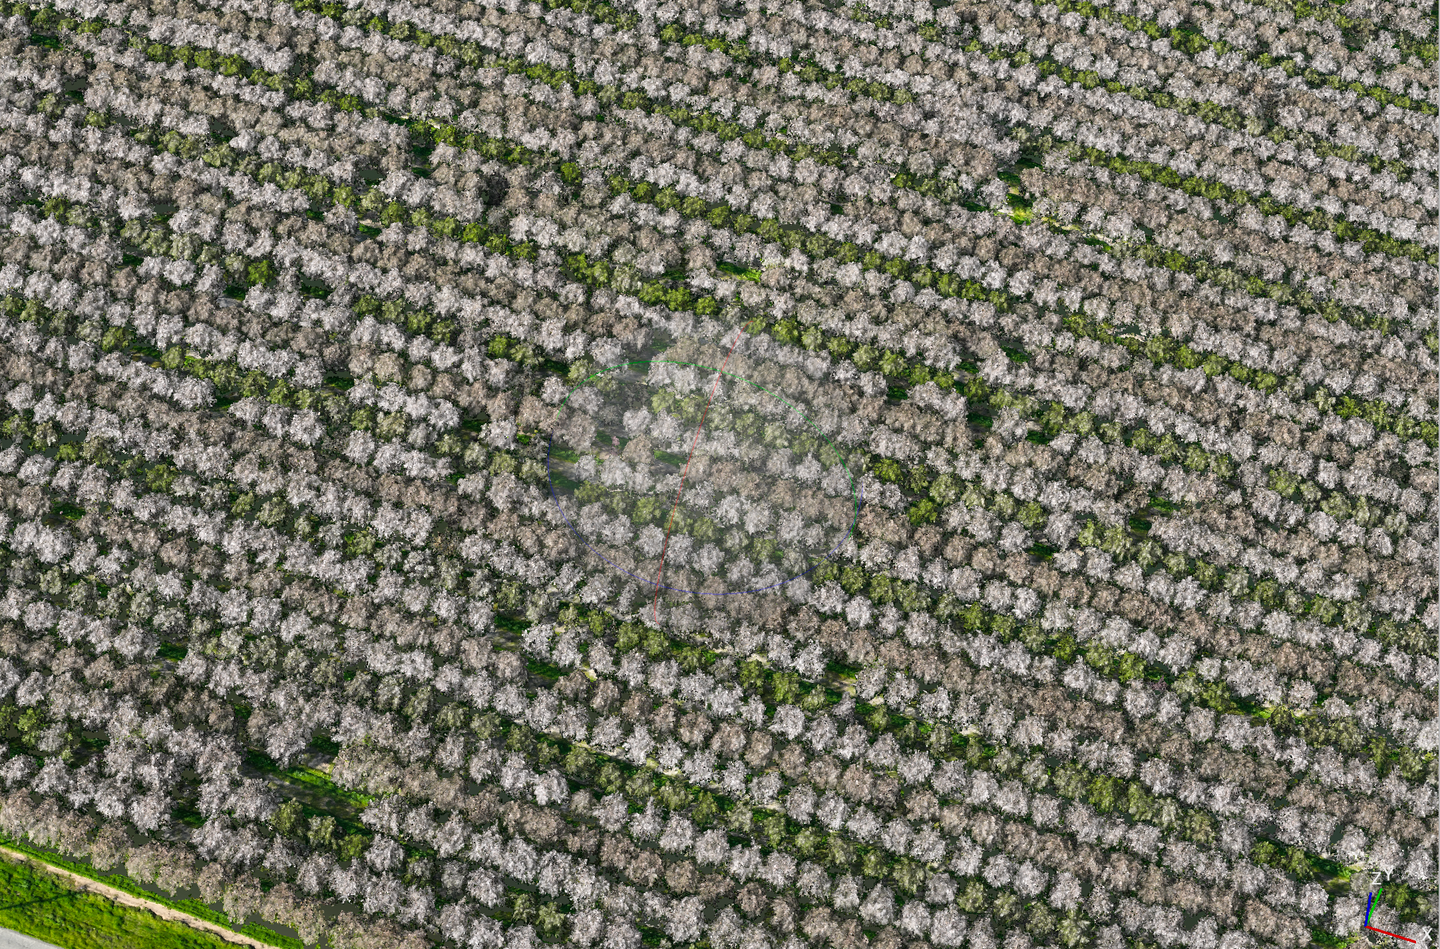 Photogrammetry Dataset - Central Valley Fruit Trees (In Bloom) - 250ft AGL - Mavic 3 Multispectral (Calibration plate)